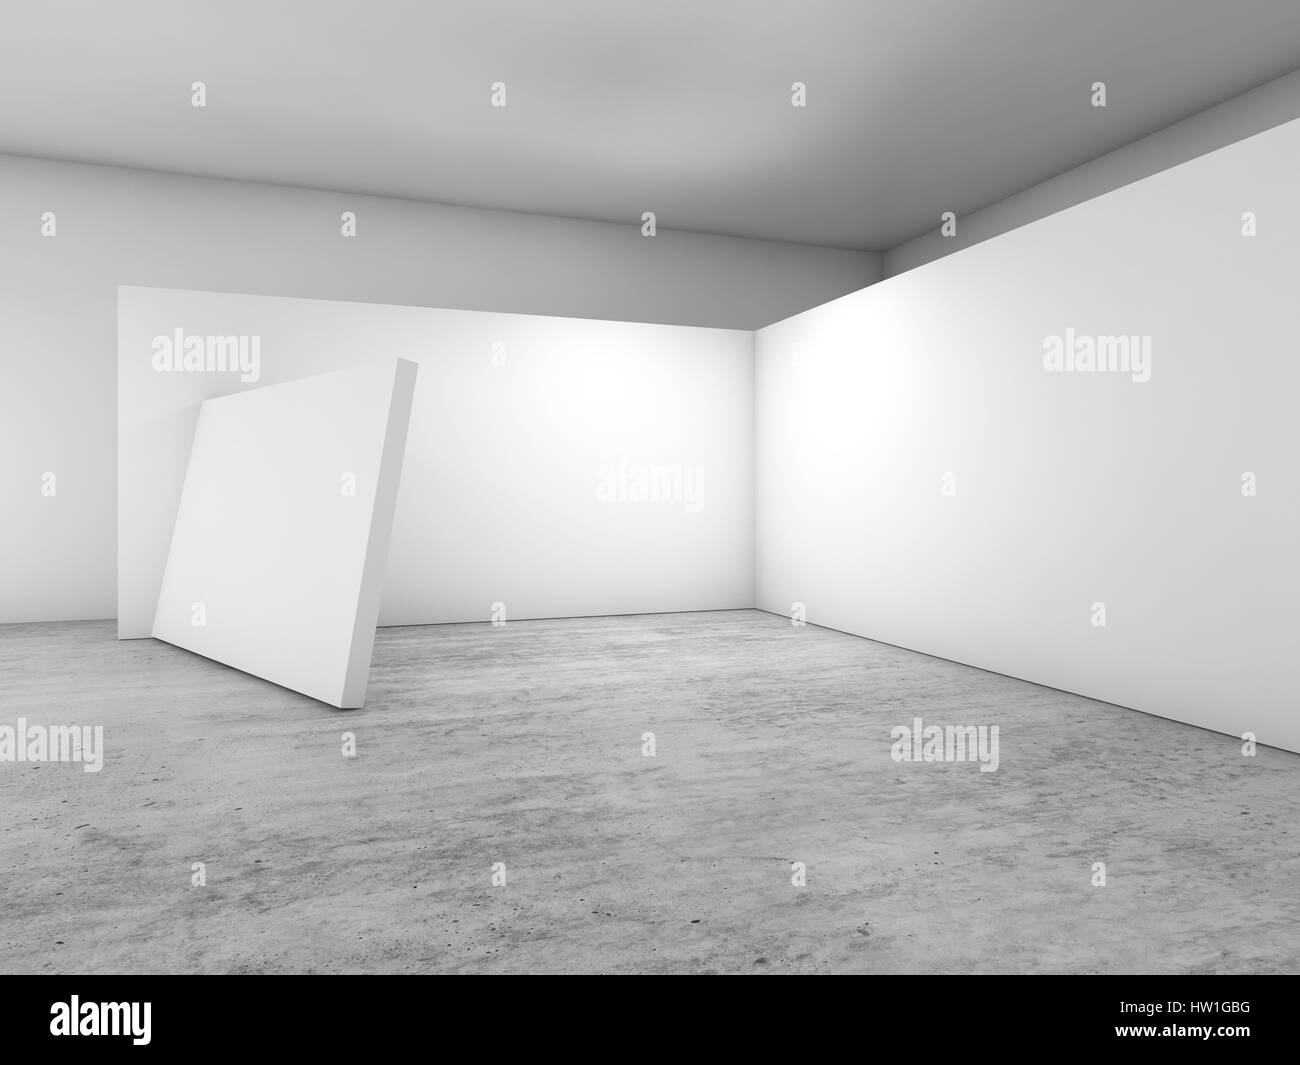 Abstract empty interior, clean white installation on concrete floor, contemporary architecture design. 3d render illustration Stock Photo